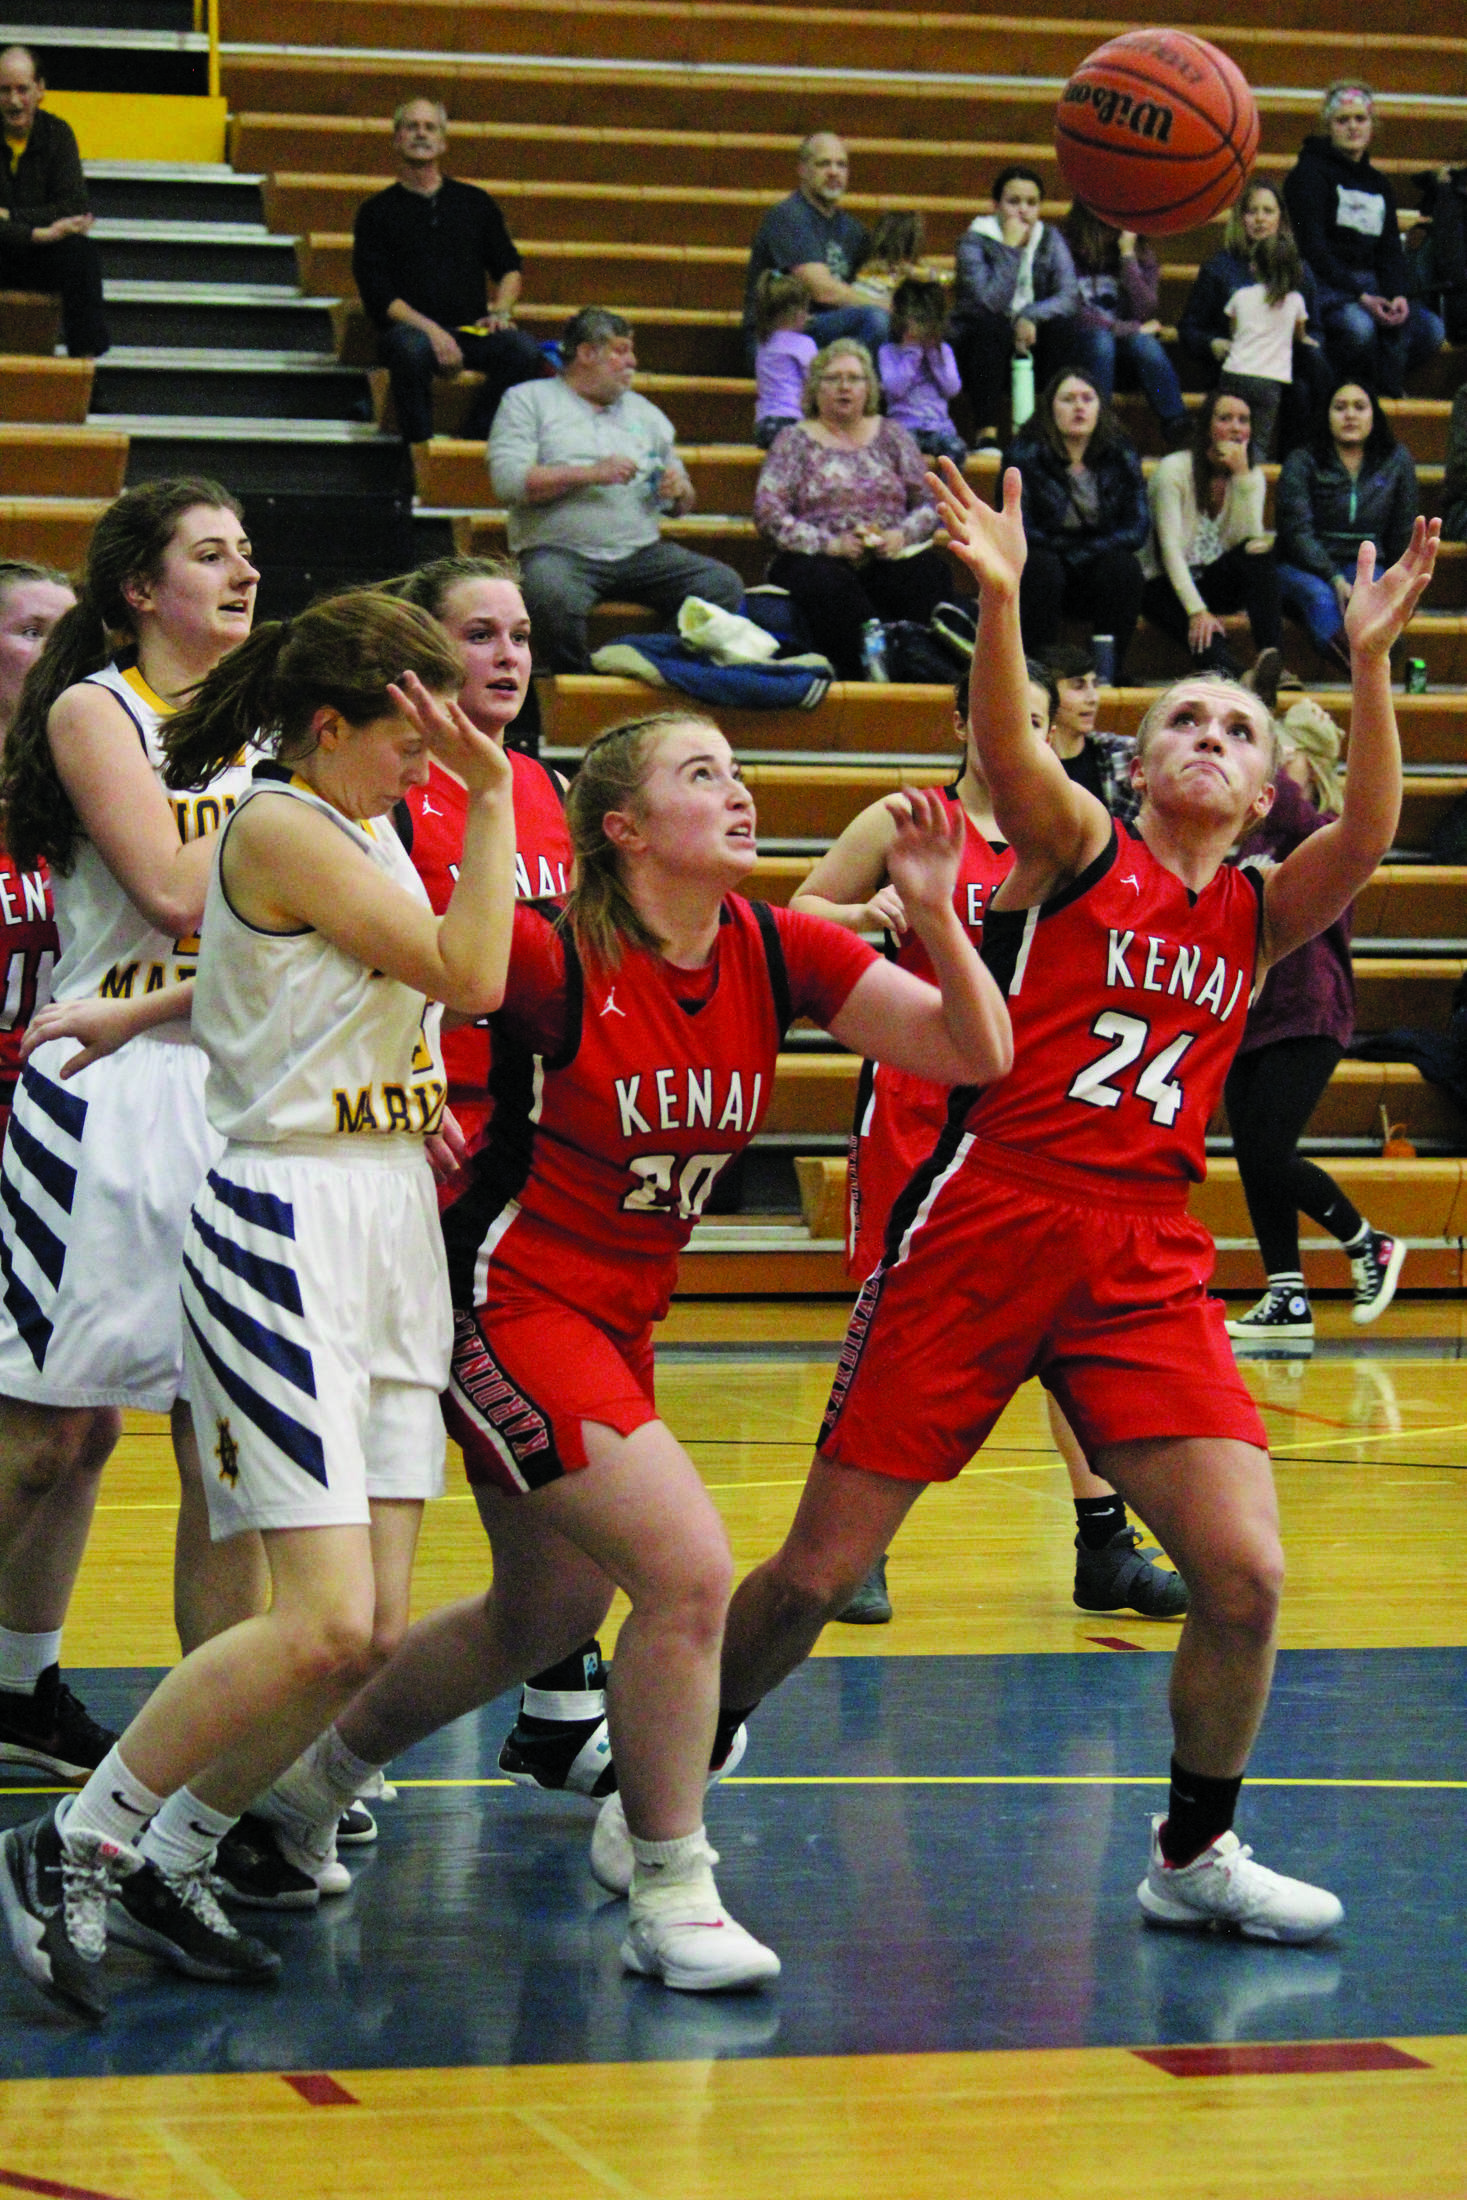 Kenai’s Damaris Severson reaches for the ball after it comes loose during a Wednesday, Feb. 19, 2020 basketball game at Homer High School in Homer, Alaska. (Photo by Megan Pacer/Homer News)